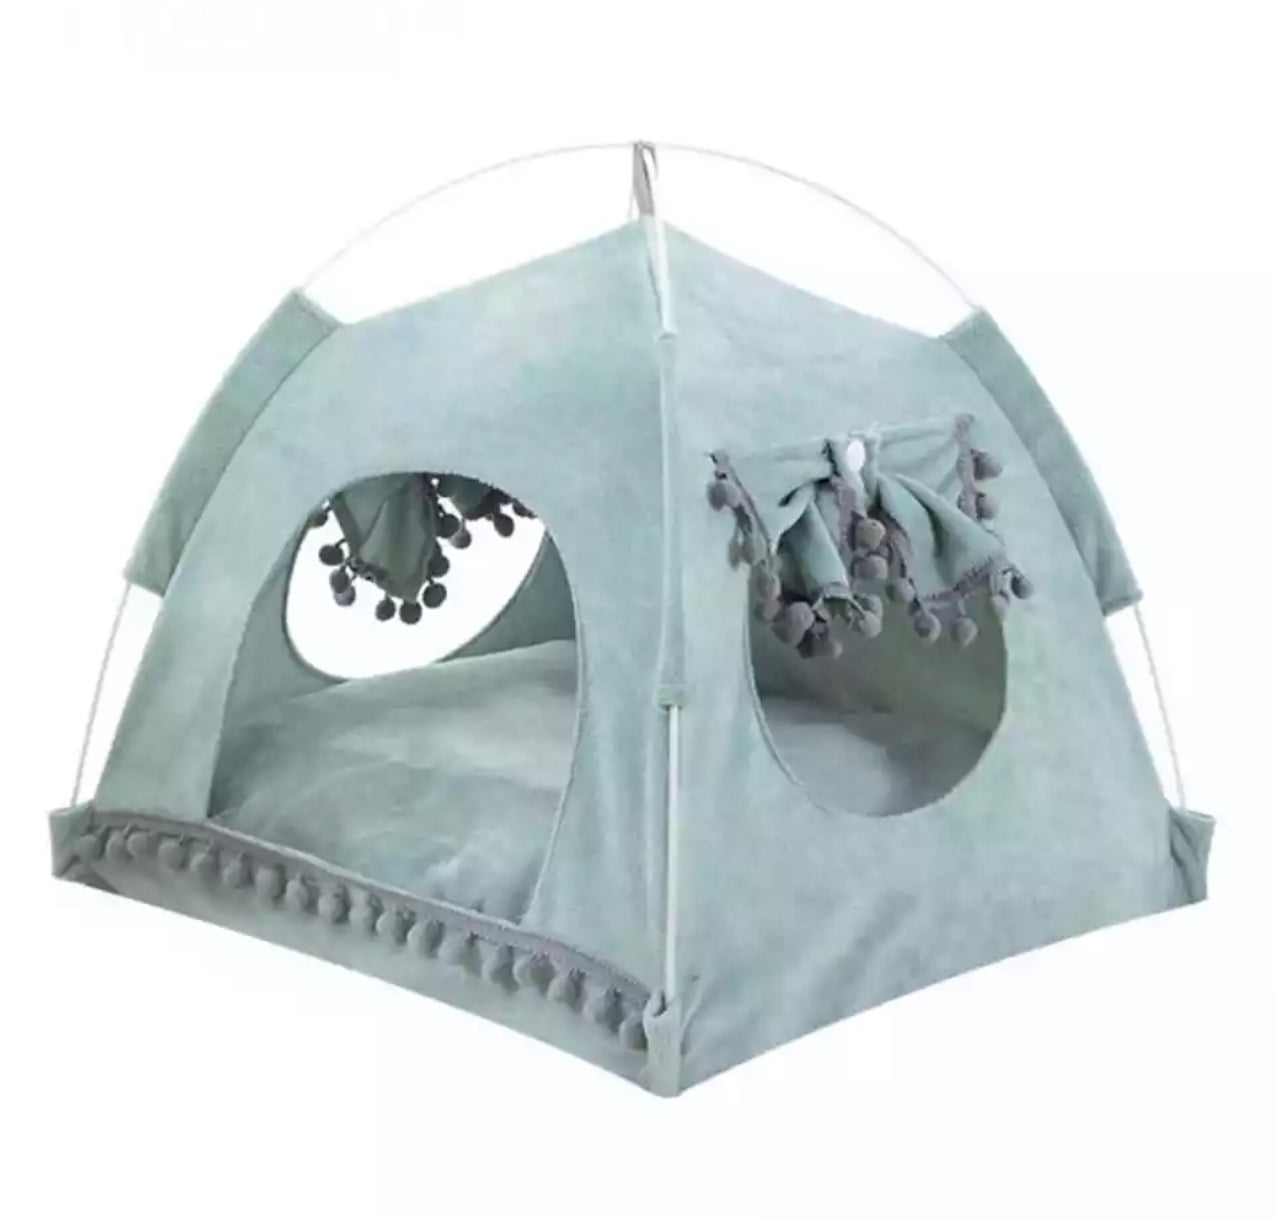 Enclosed Dog House Tent -